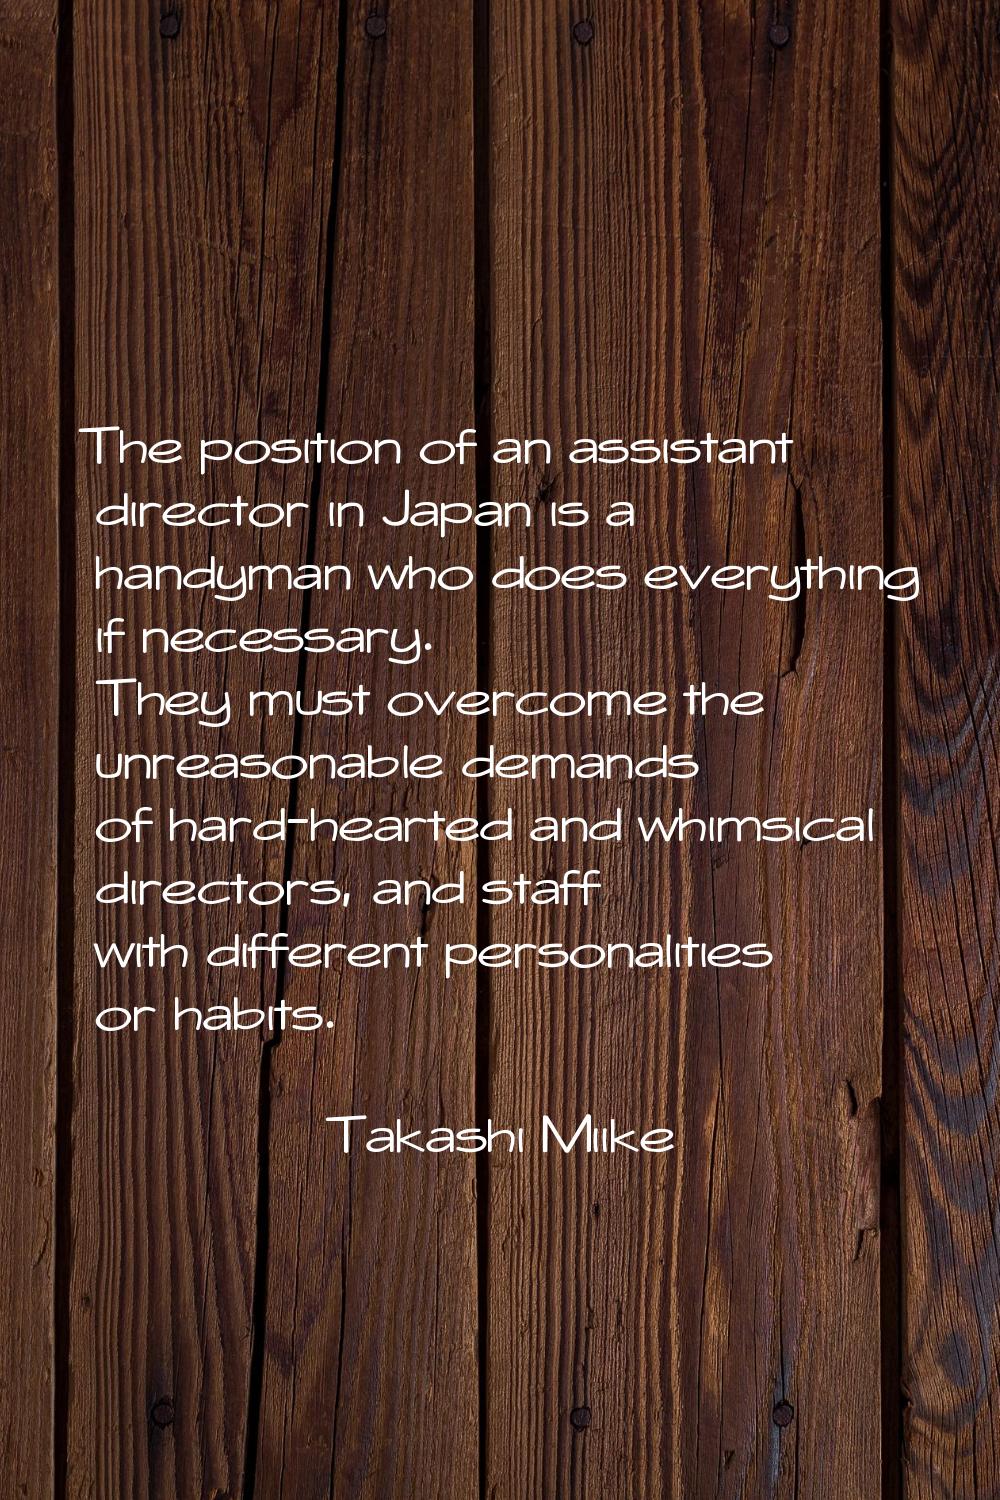 The position of an assistant director in Japan is a handyman who does everything if necessary. They